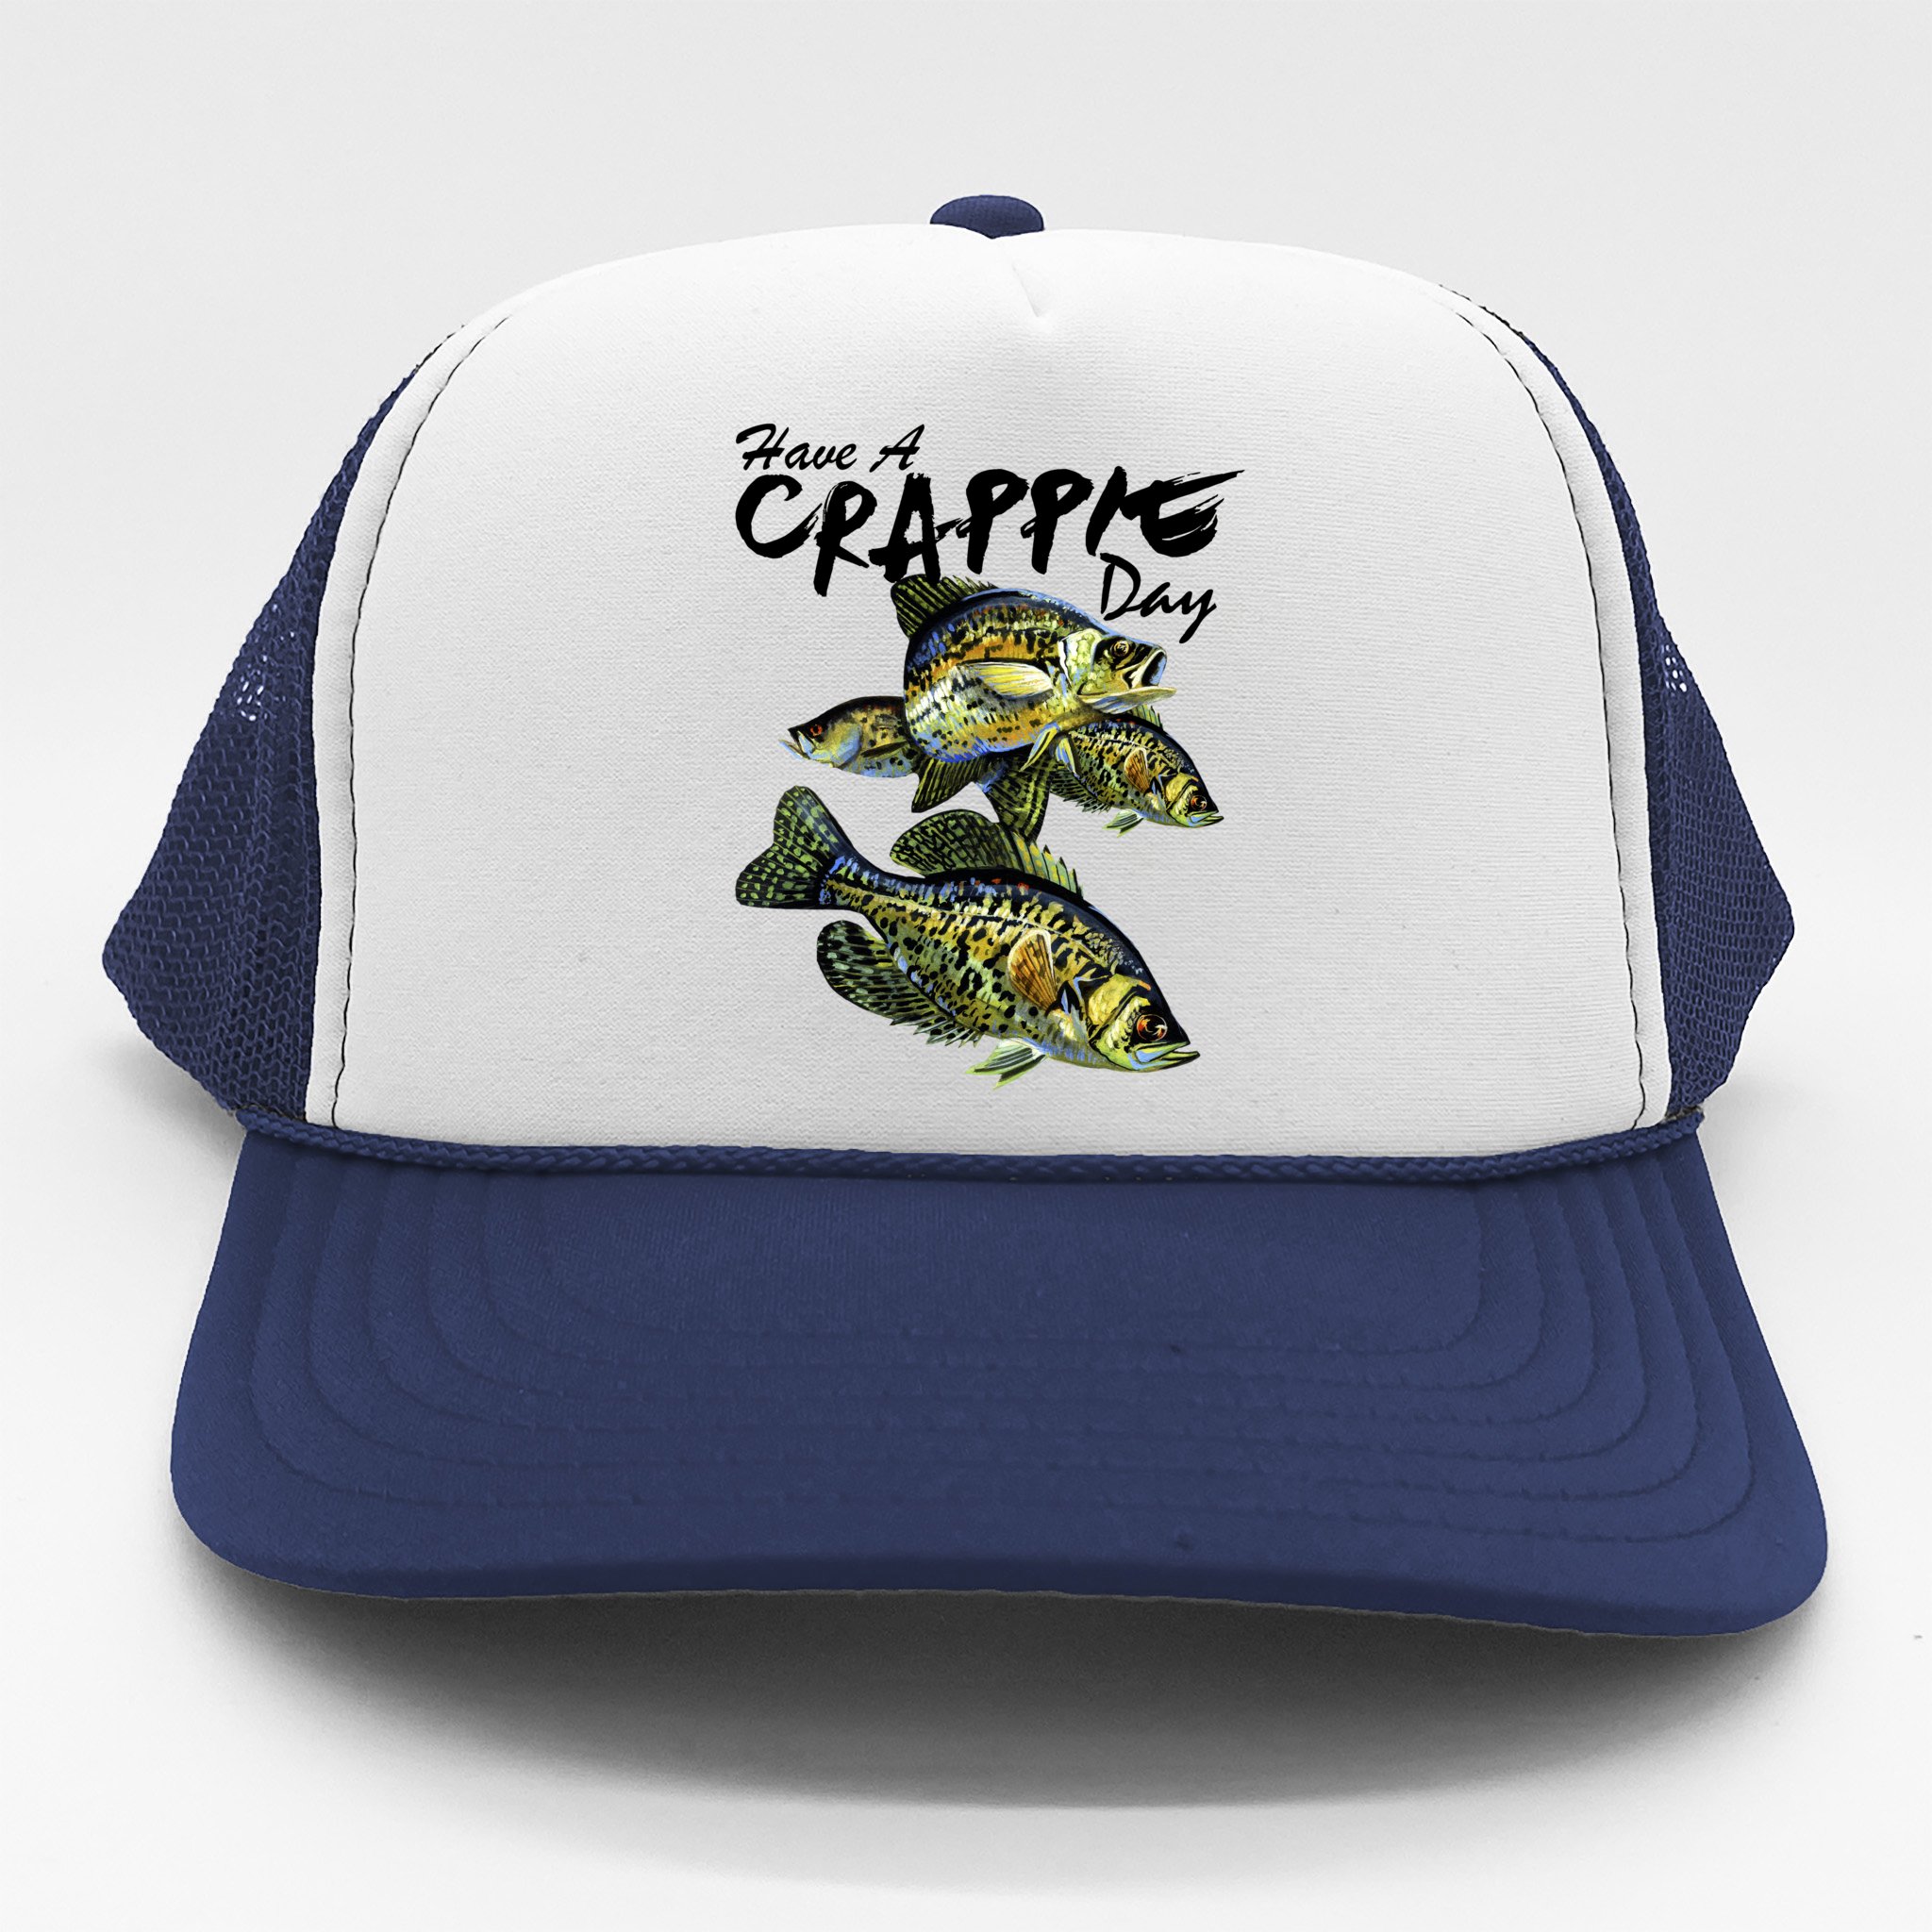 Have A Crappie Day Panfish Funny Fishing Trucker Hat